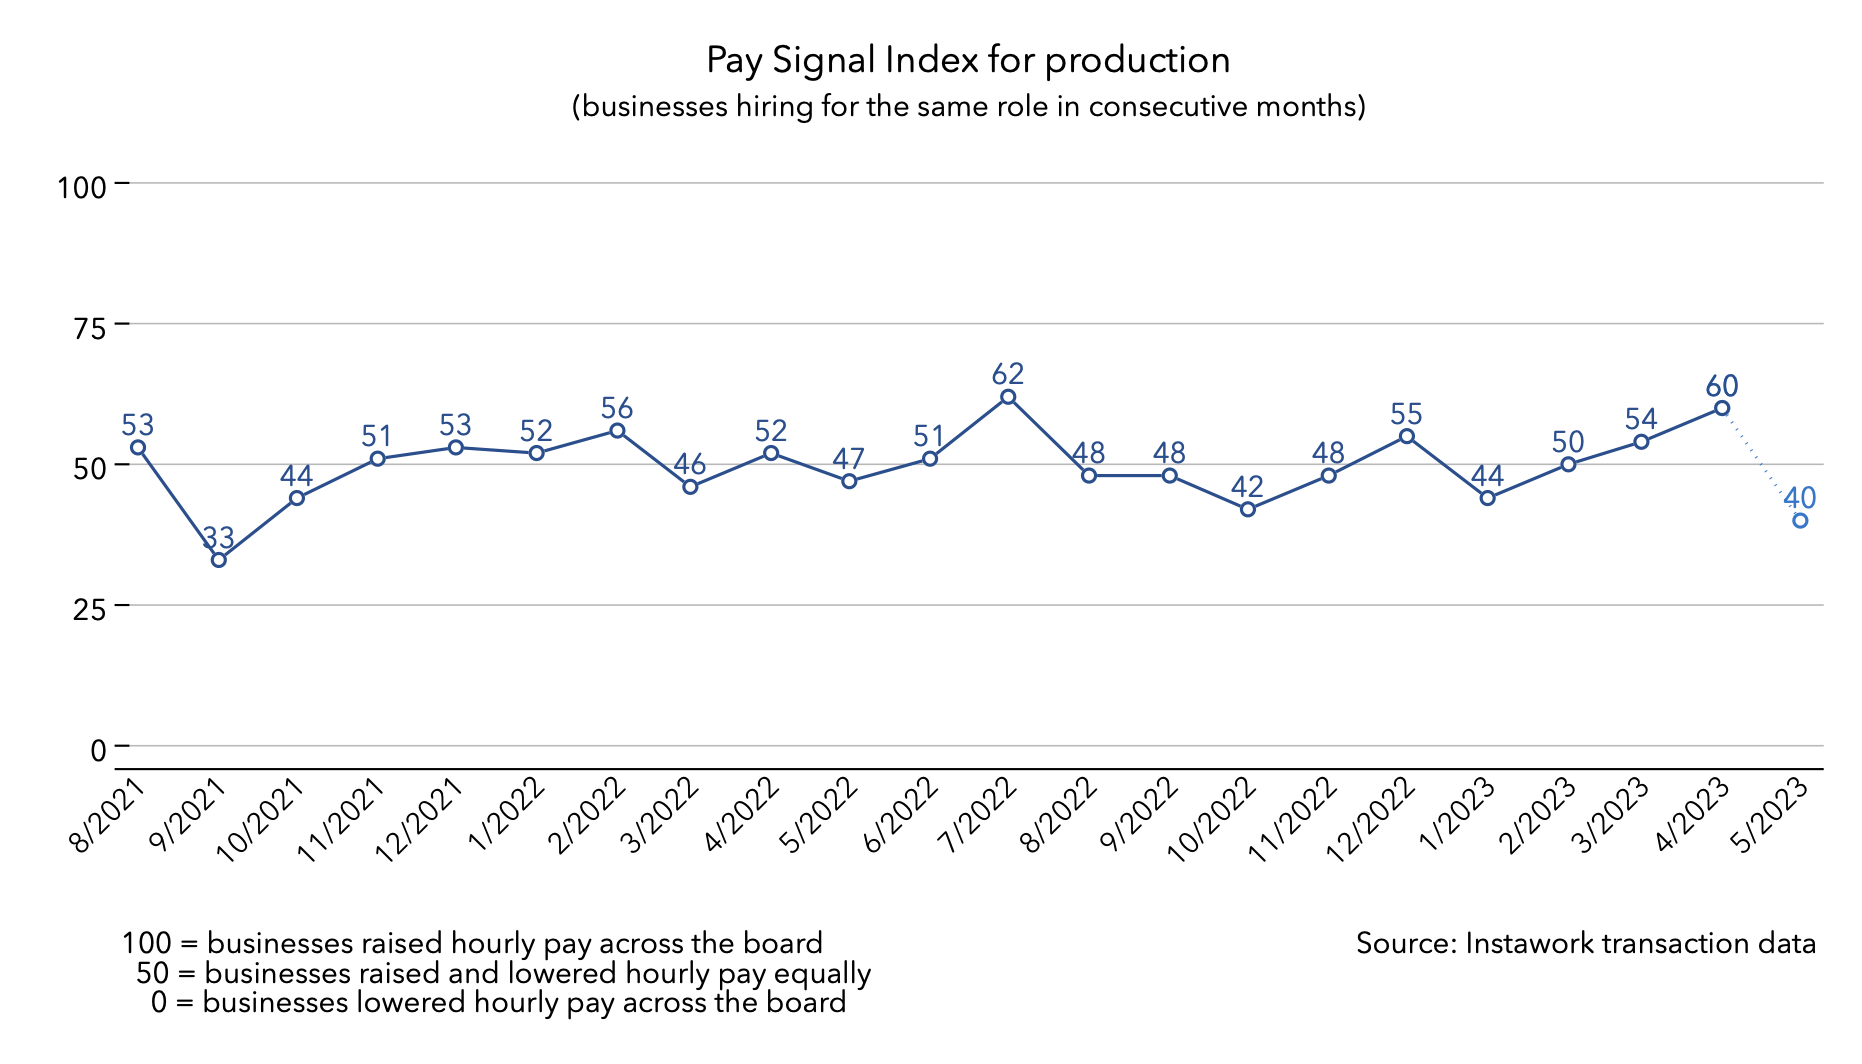 1 May 2023 Pay Signal Index for production